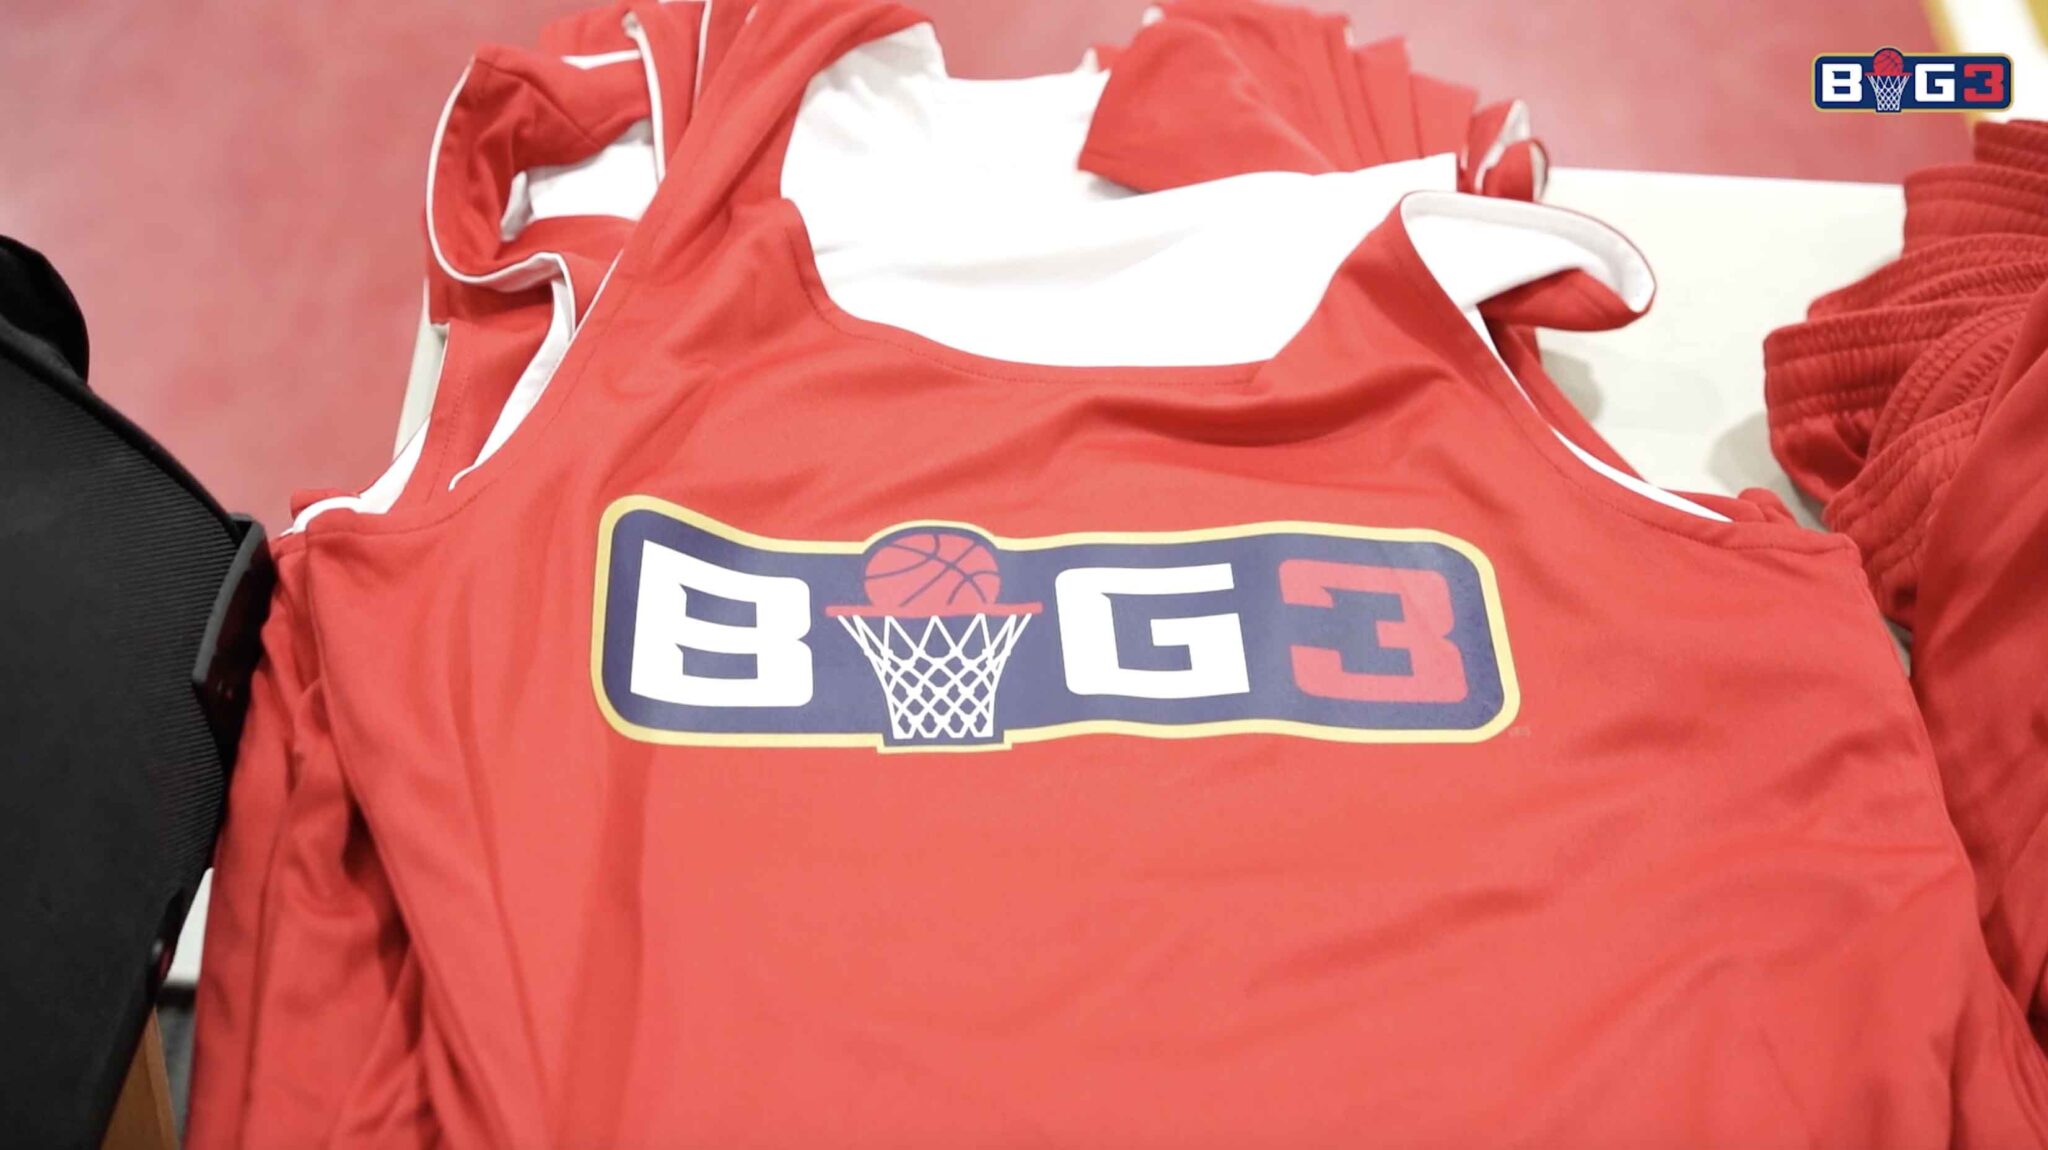 Big3 Tryouts in D.C. Ice Cube